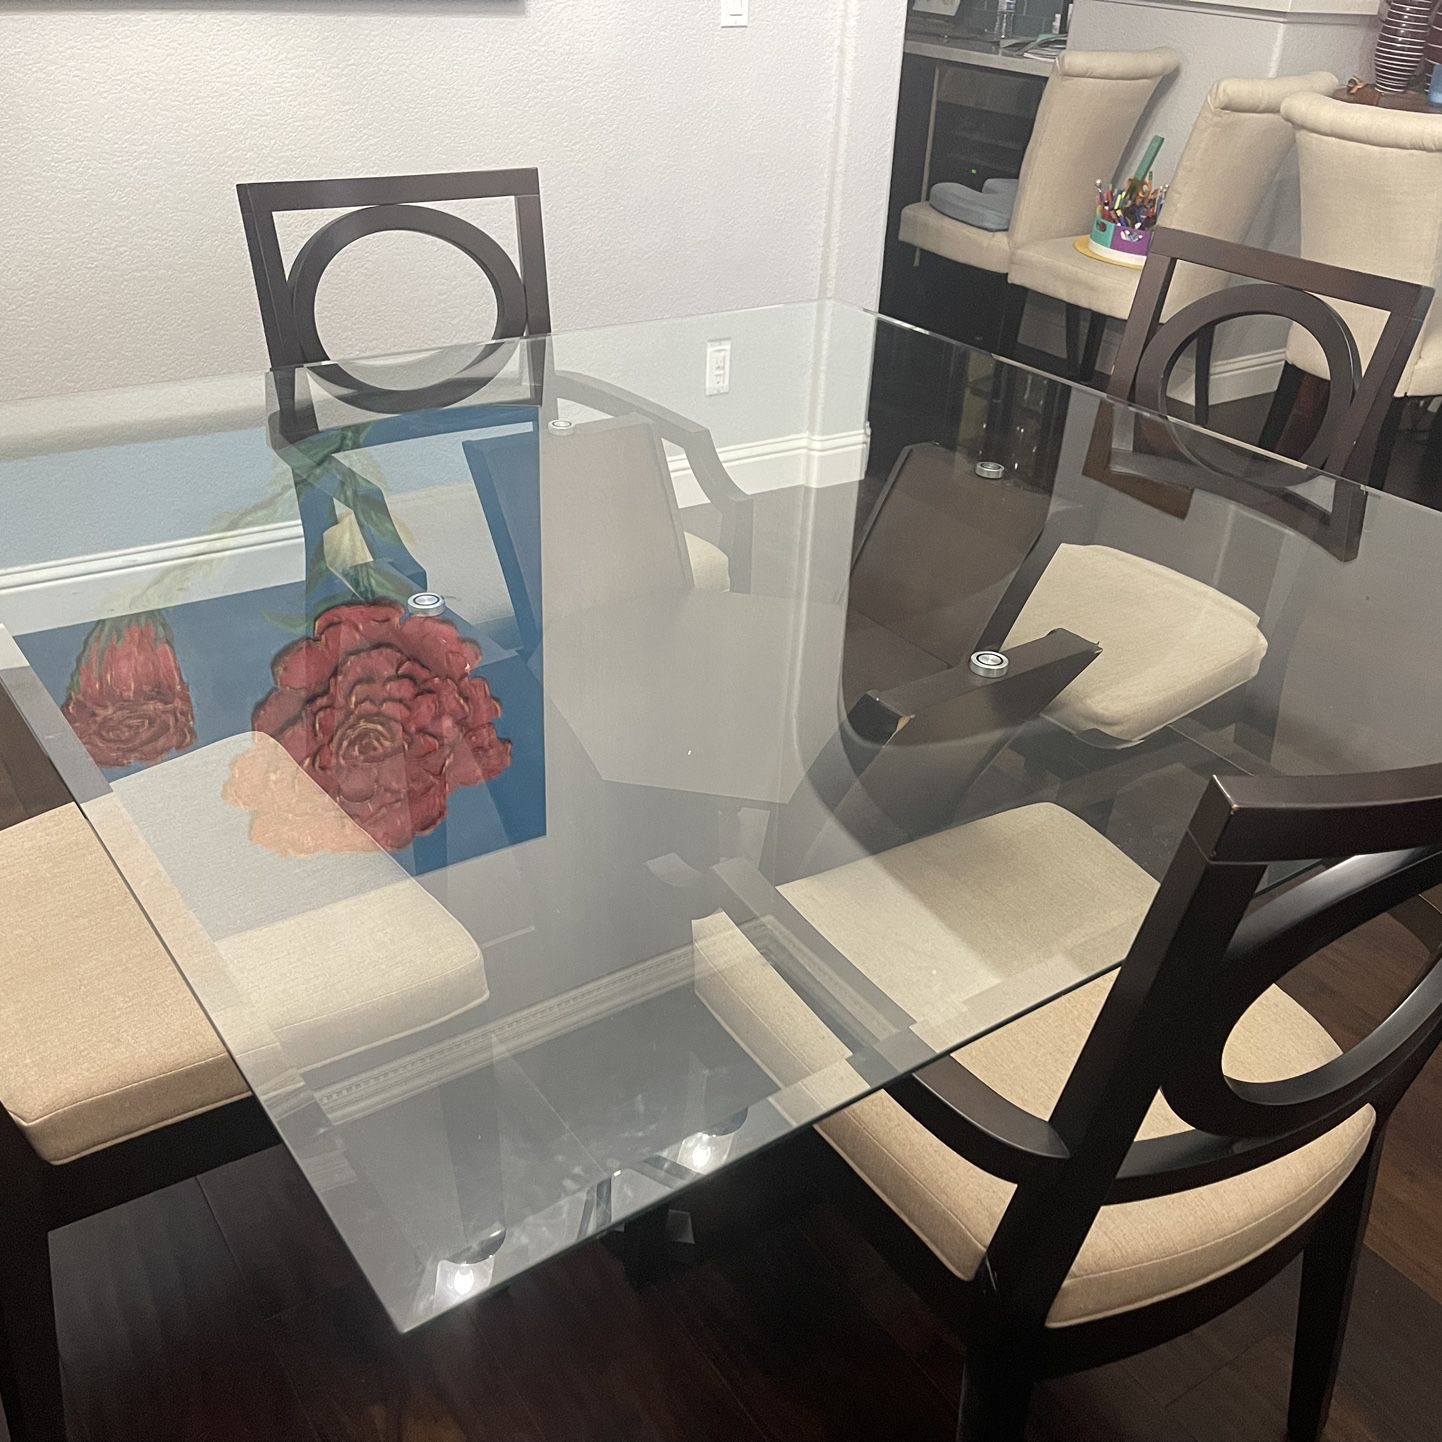 Glass Dining Table With 4 Chairs 